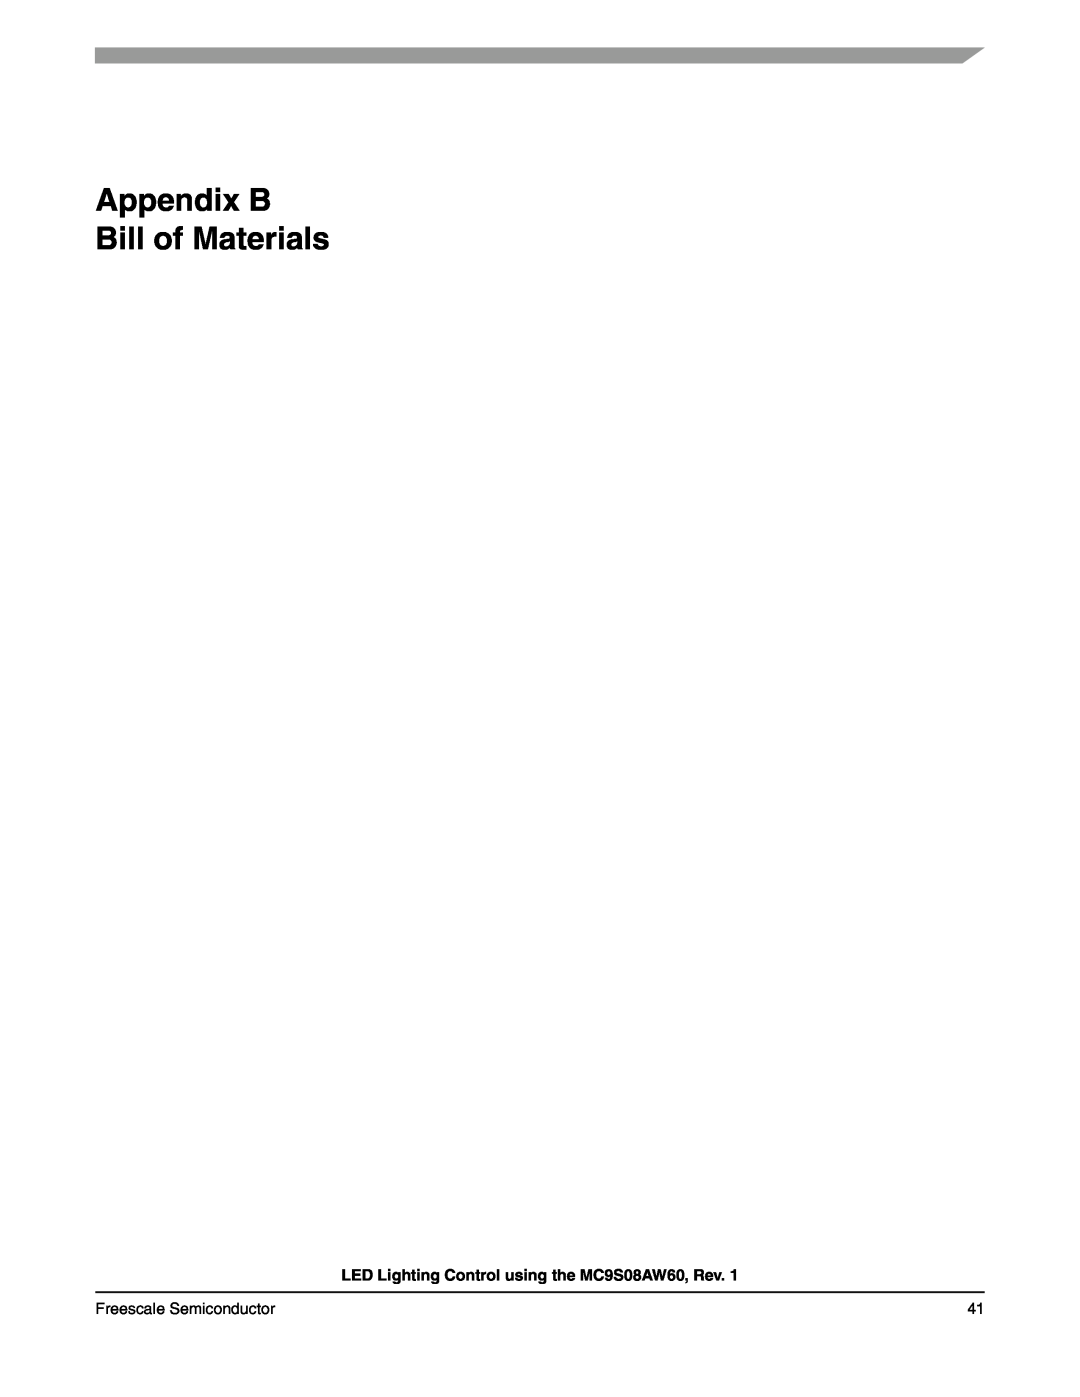 Freescale Semiconductor manual Appendix B Bill of Materials, LED Lighting Control using the MC9S08AW60, Rev 